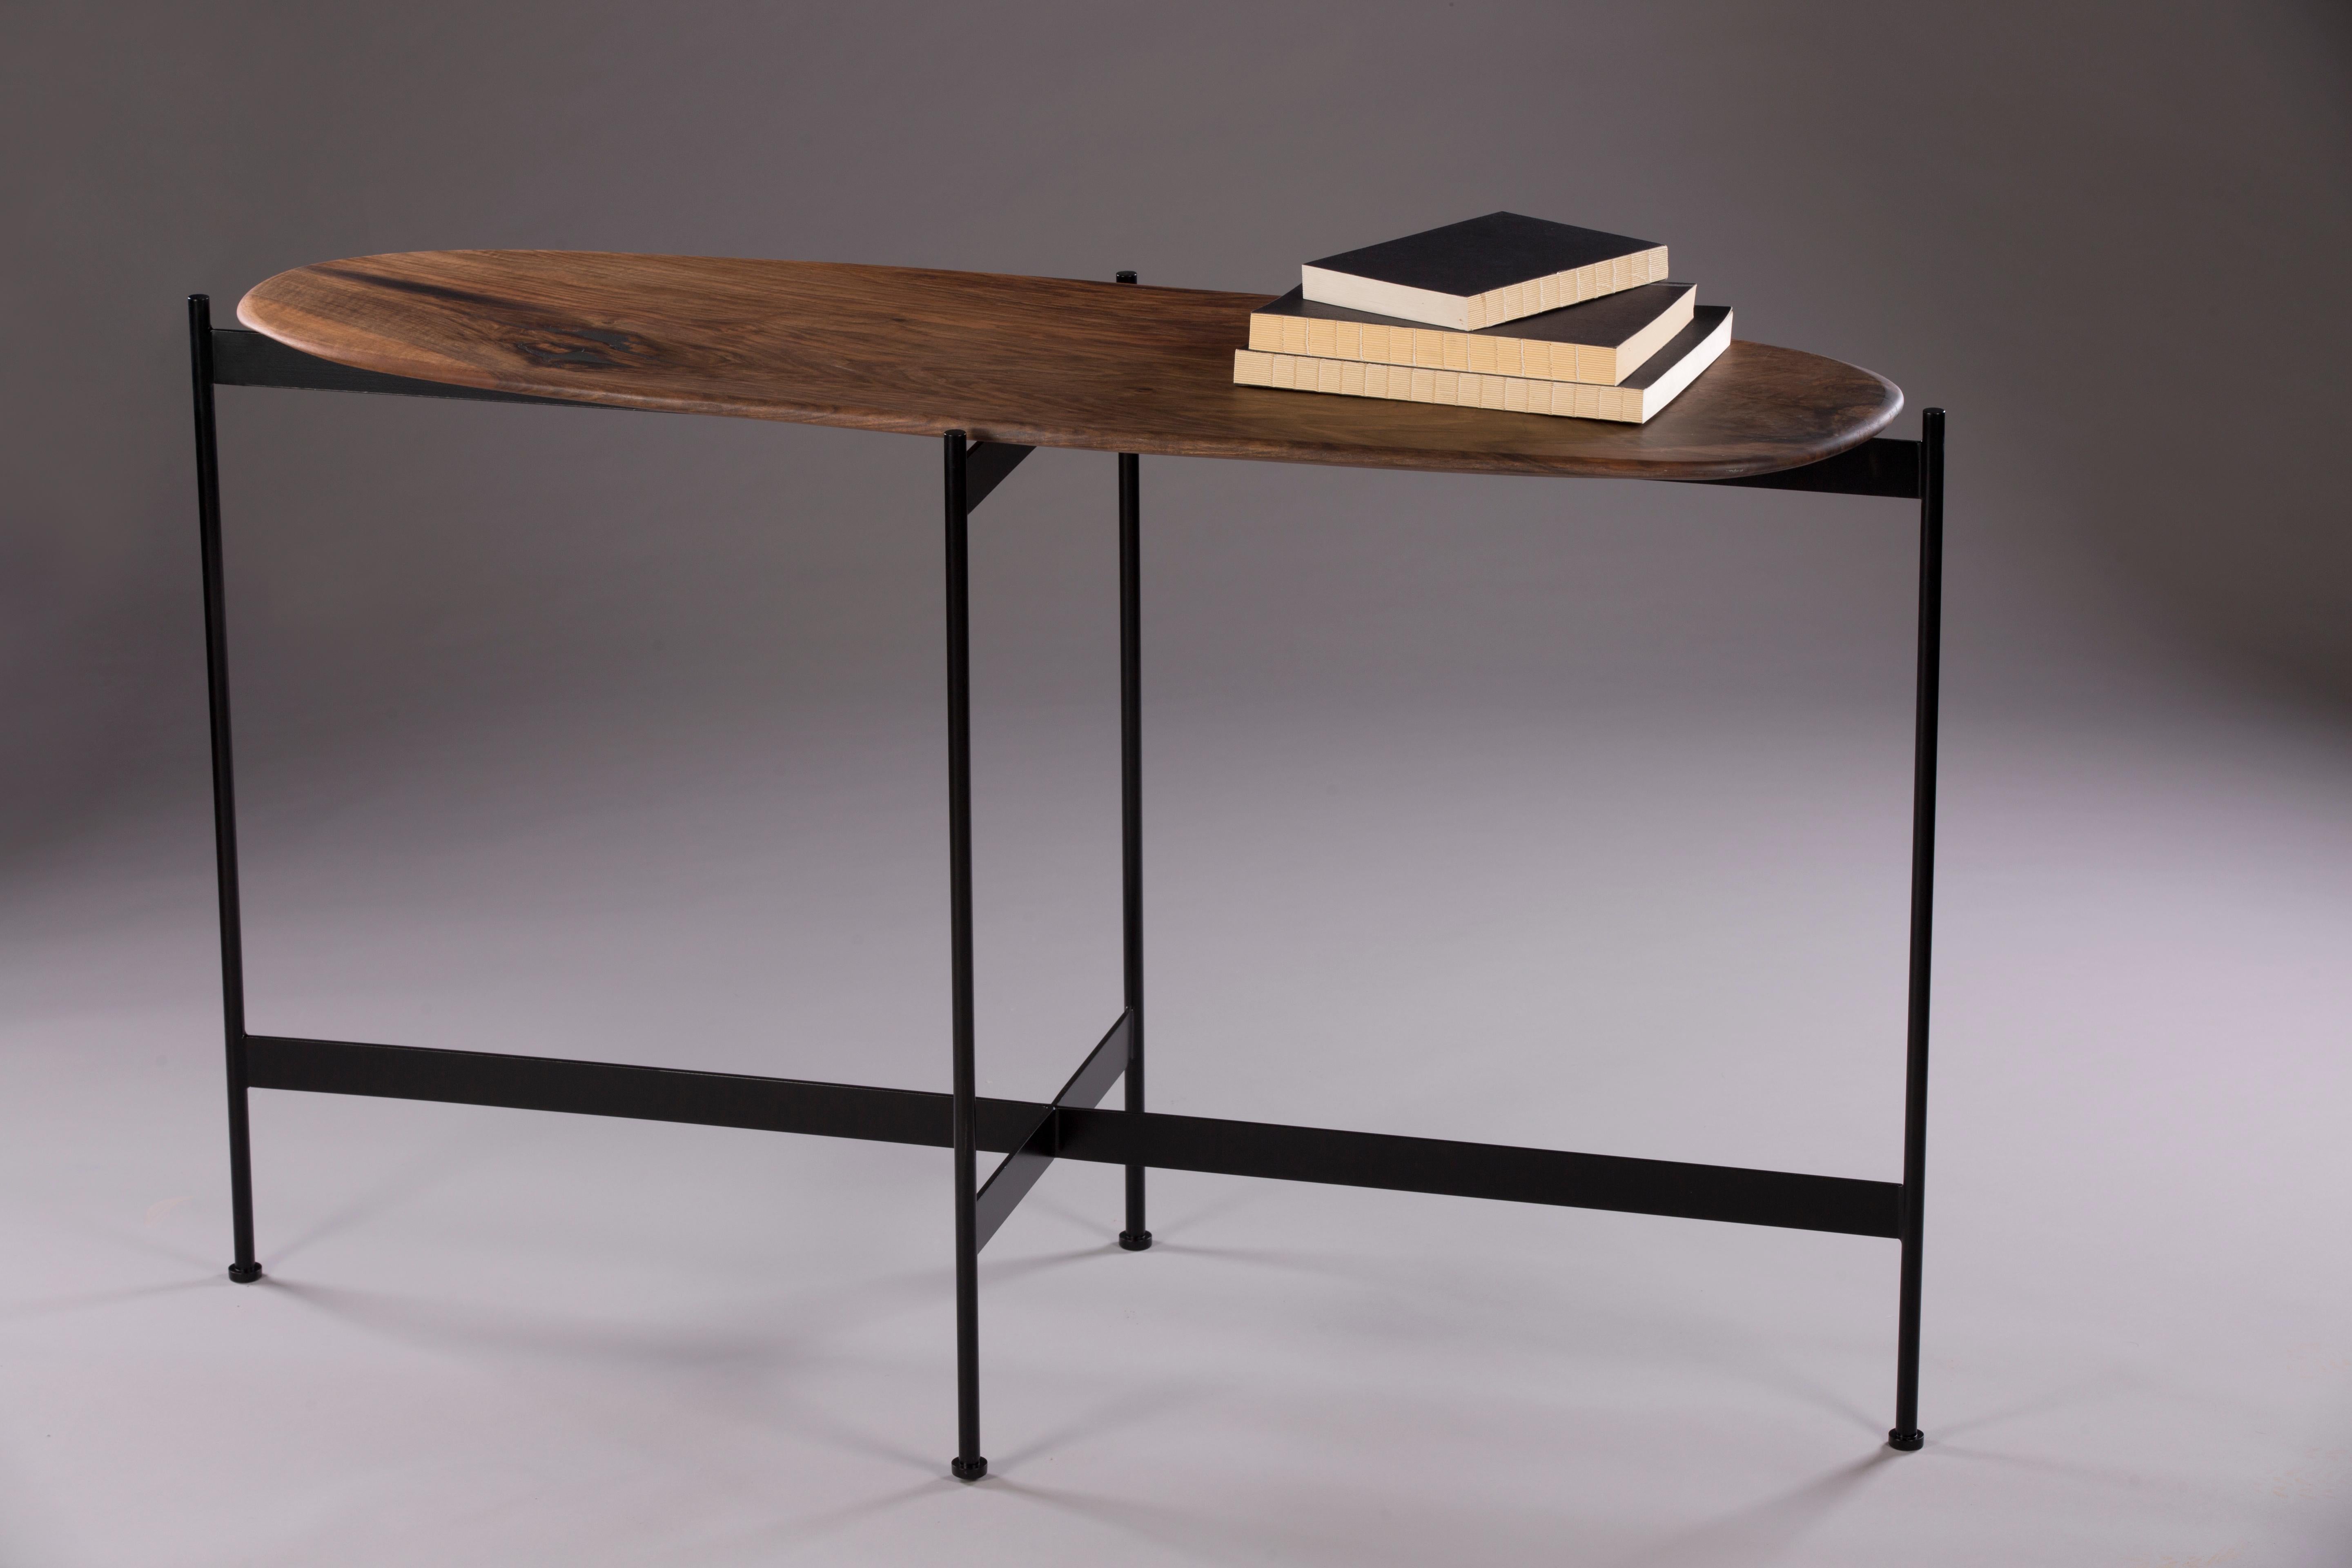 Tas console by Rectangle Studio
Dimensions: W 125 x D 45 x H 75 cm 
Materials: Massive walnut, natural wood oil, black paint coating on metal

The table is shaped and finished by the designer. For this reason, each table has different and